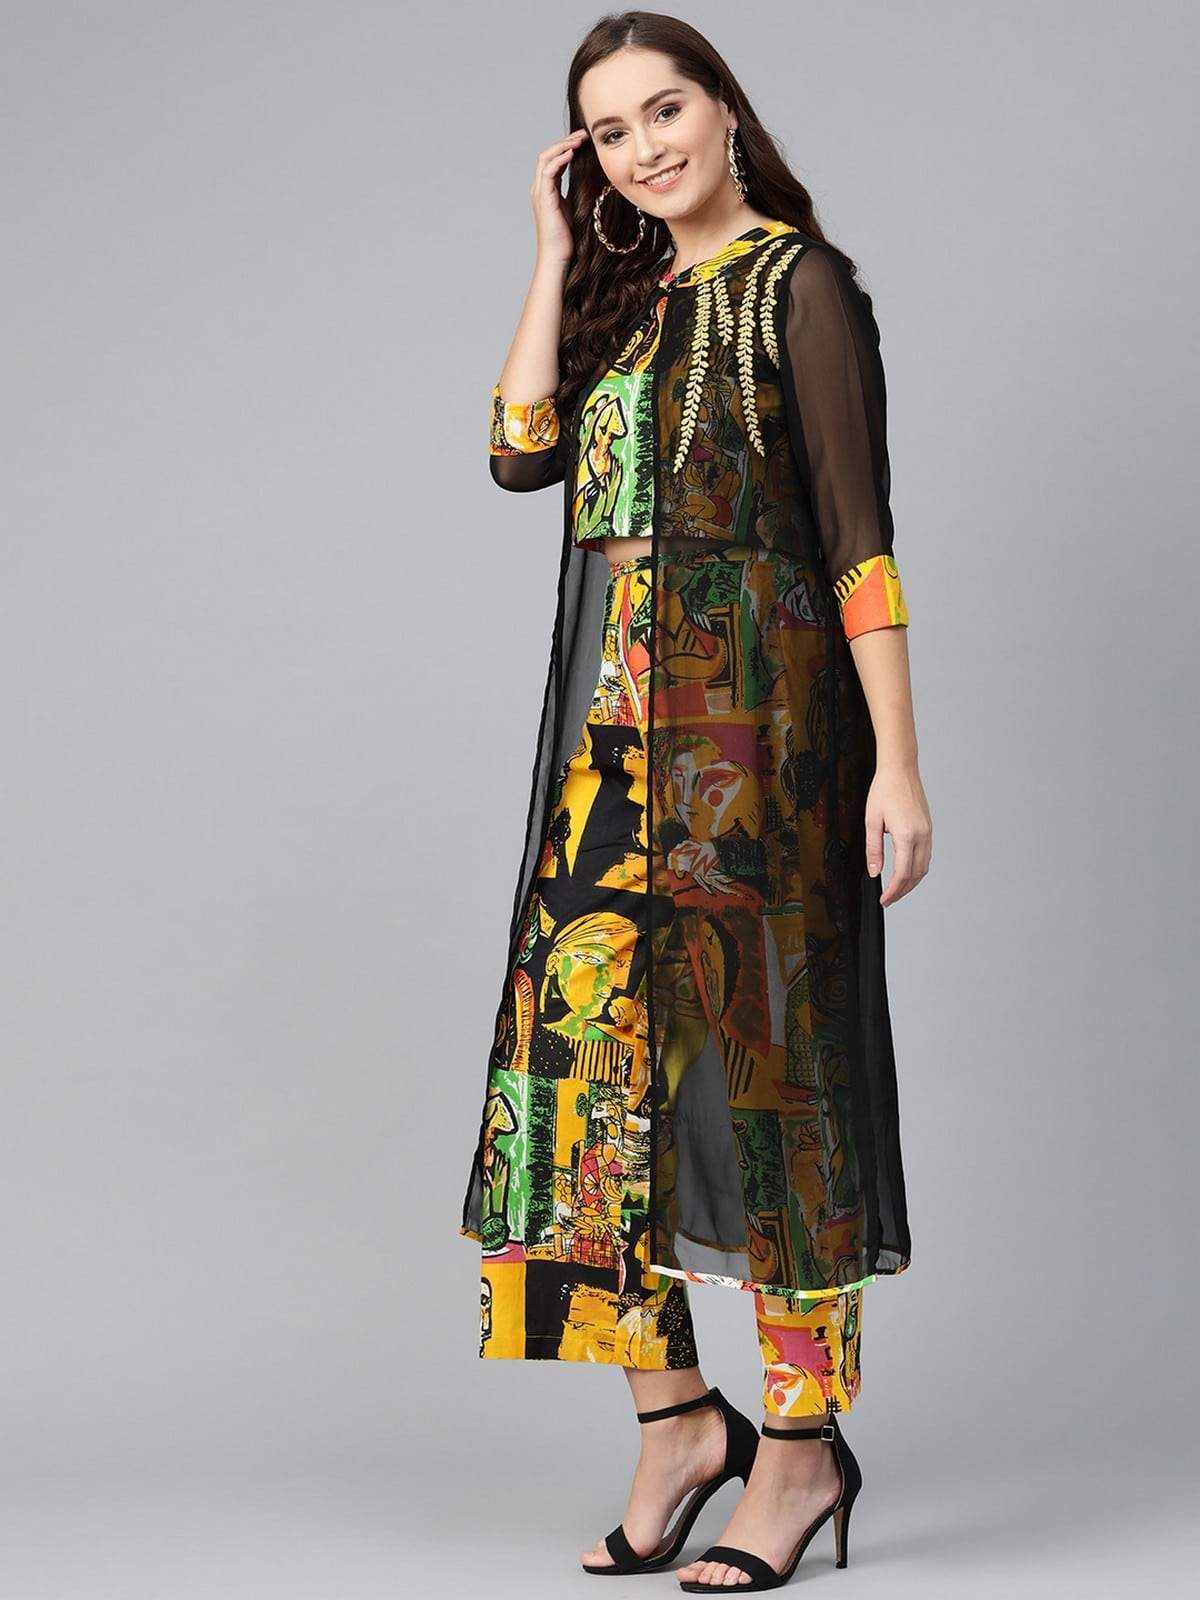 Women's Embroidered Jacket With Printed Top And Pants - Pannkh